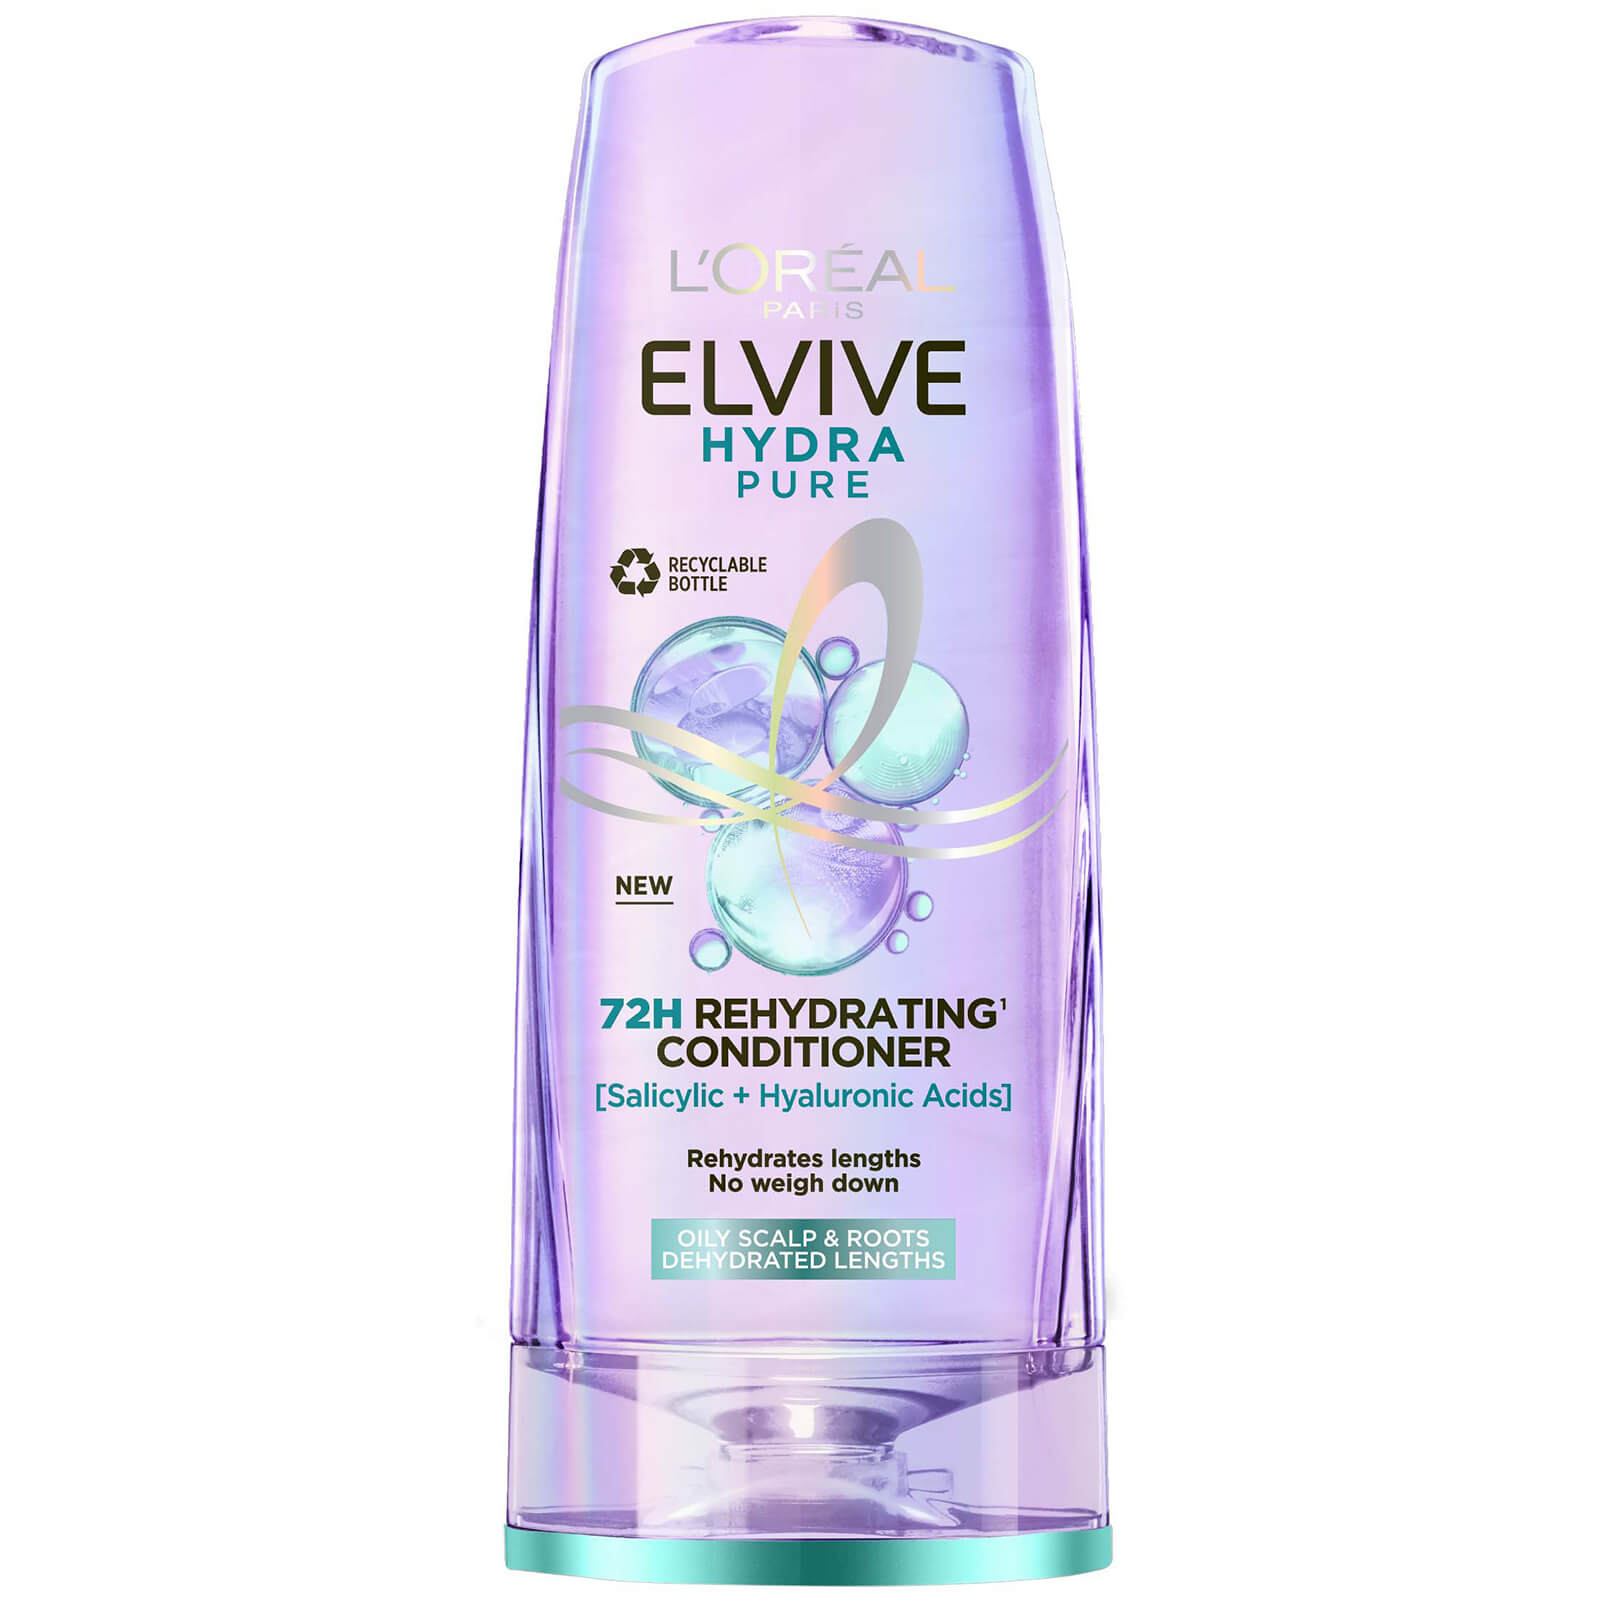 L'Oreal Paris Elvive Hydra Pure 72h Rehydrating Conditioner with Hyaluronic and Salicylic Acids 400m